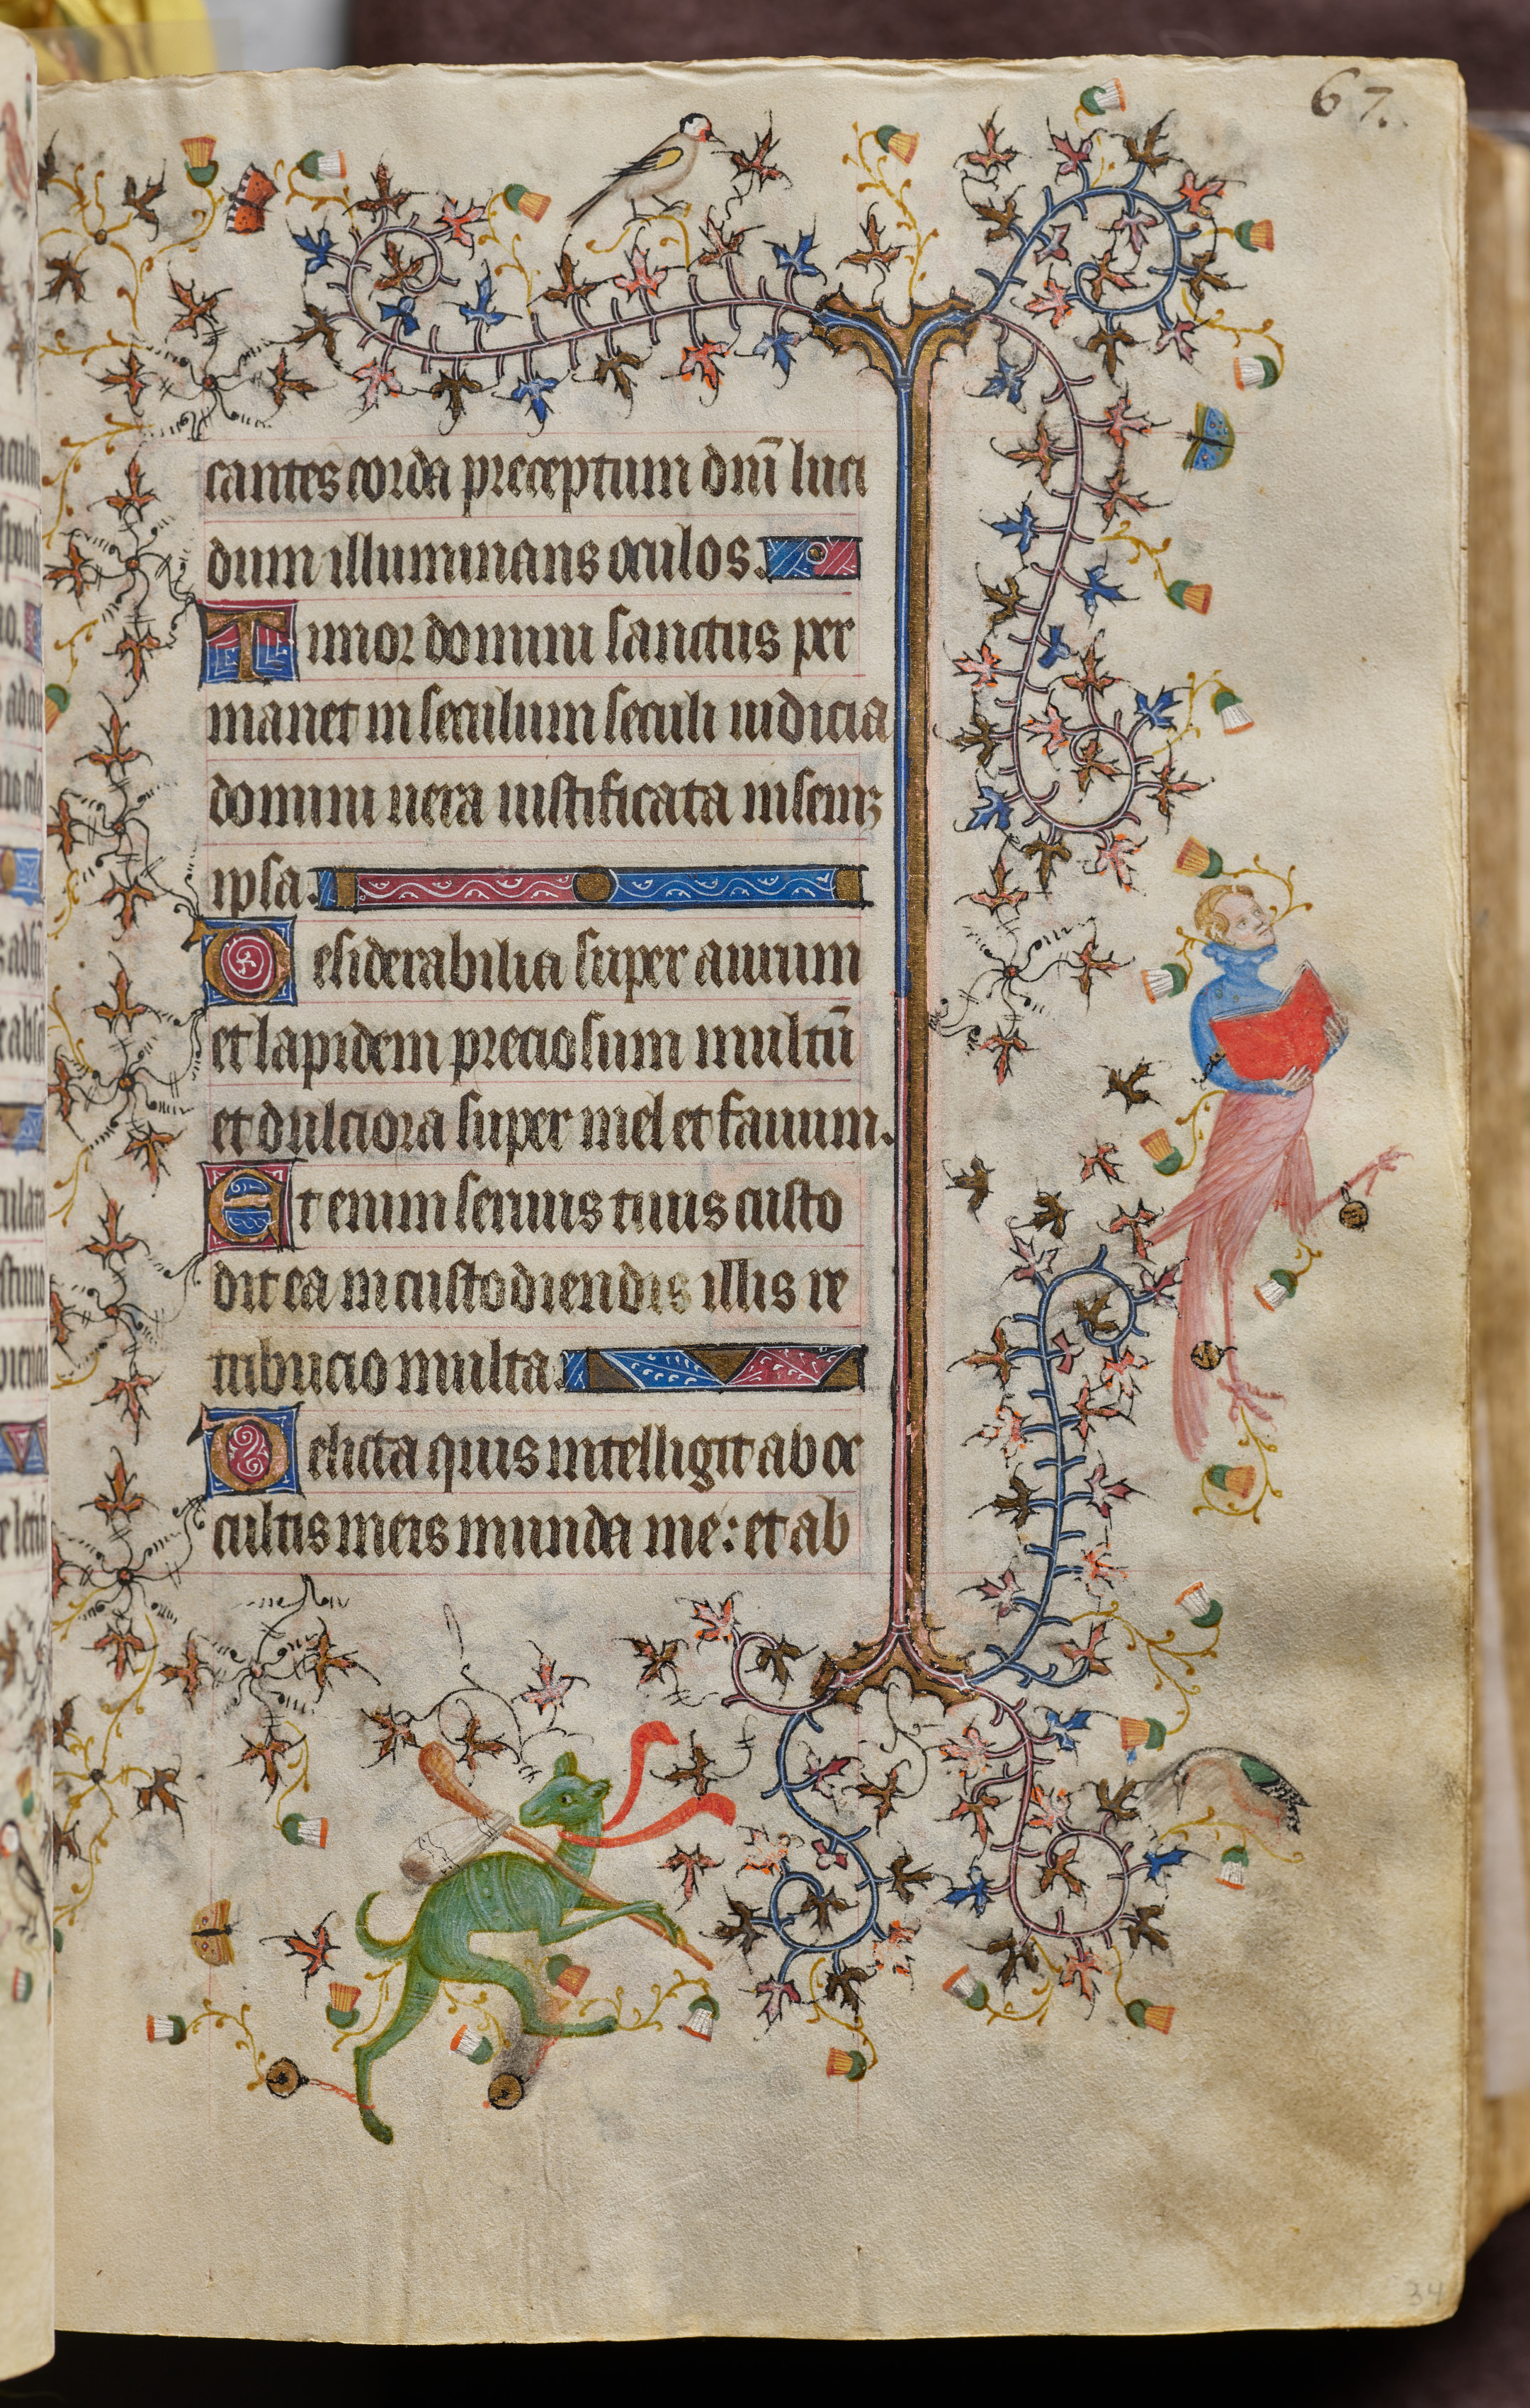 Hours of Charles the Noble, King of Navarre (1361-1425): fol. 34r, Text